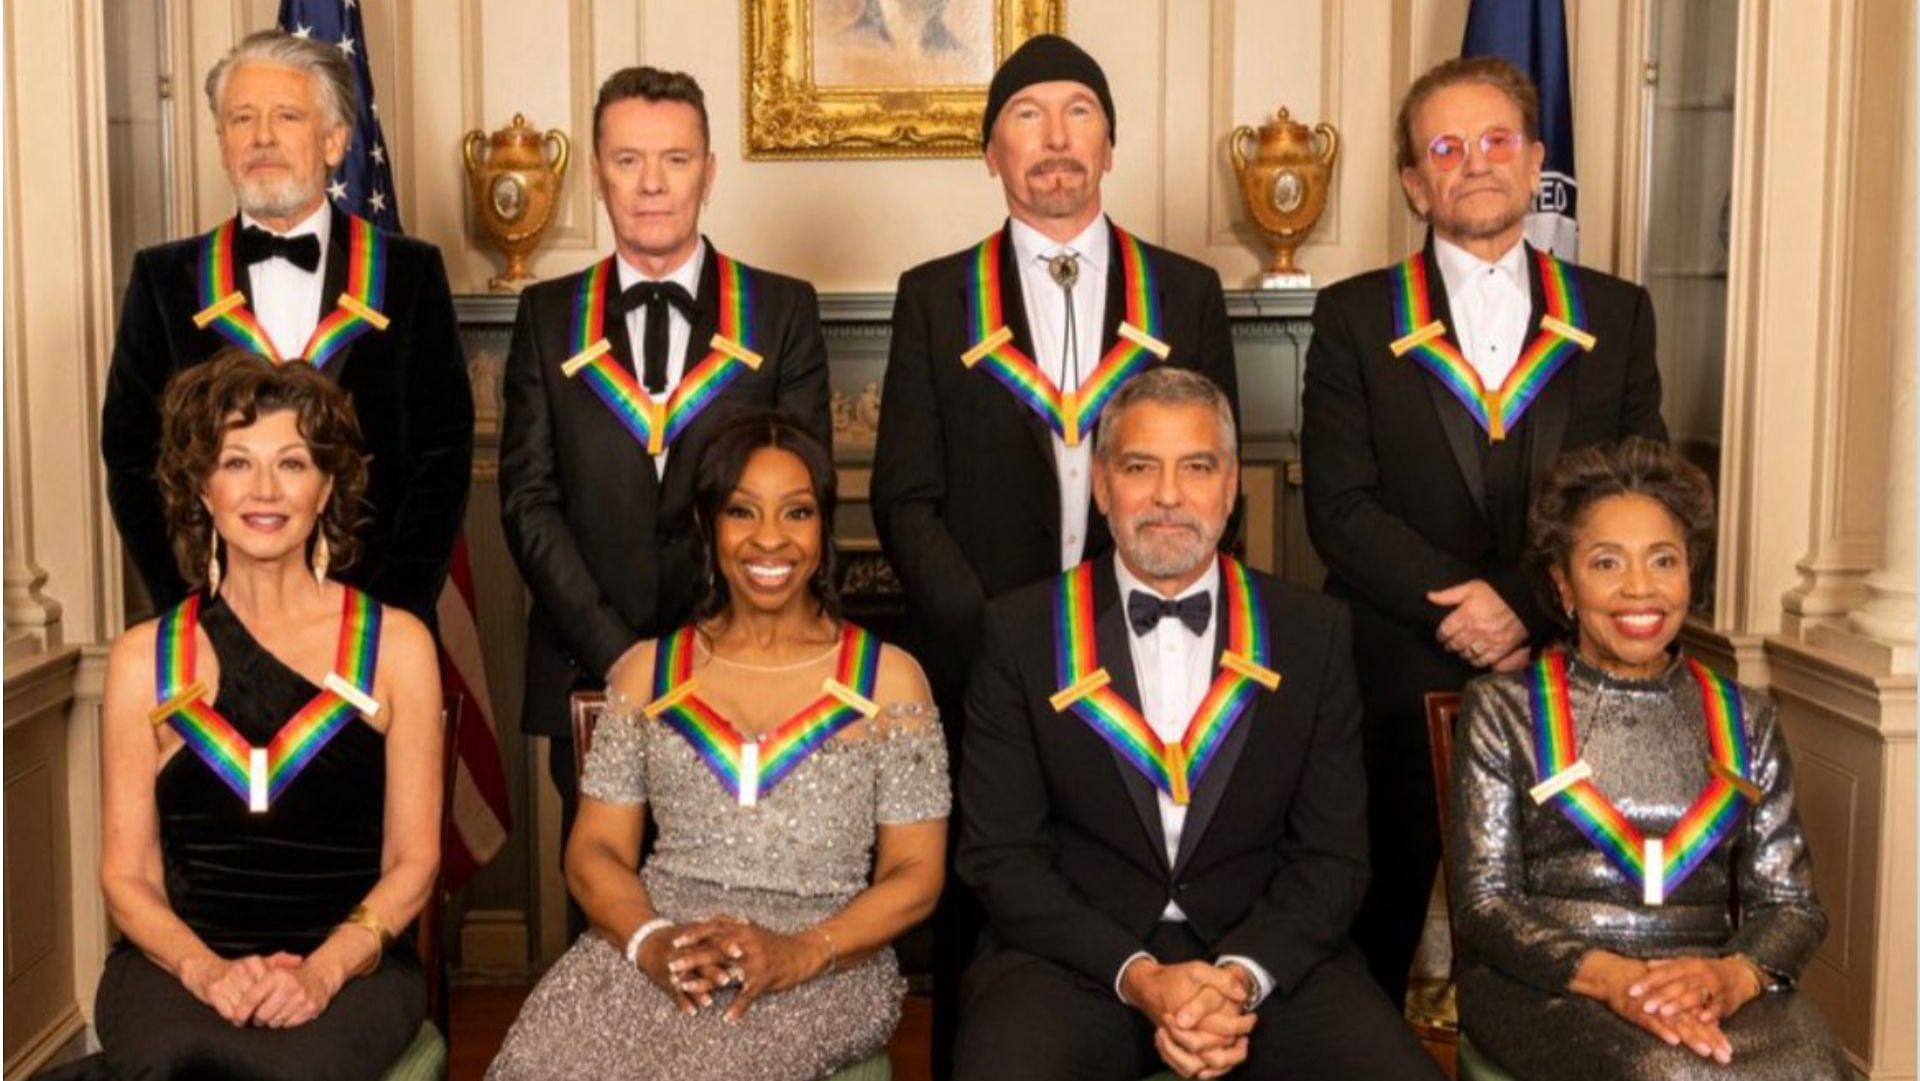 Who was honored at the Kennedy Center this year? Full list of honorees